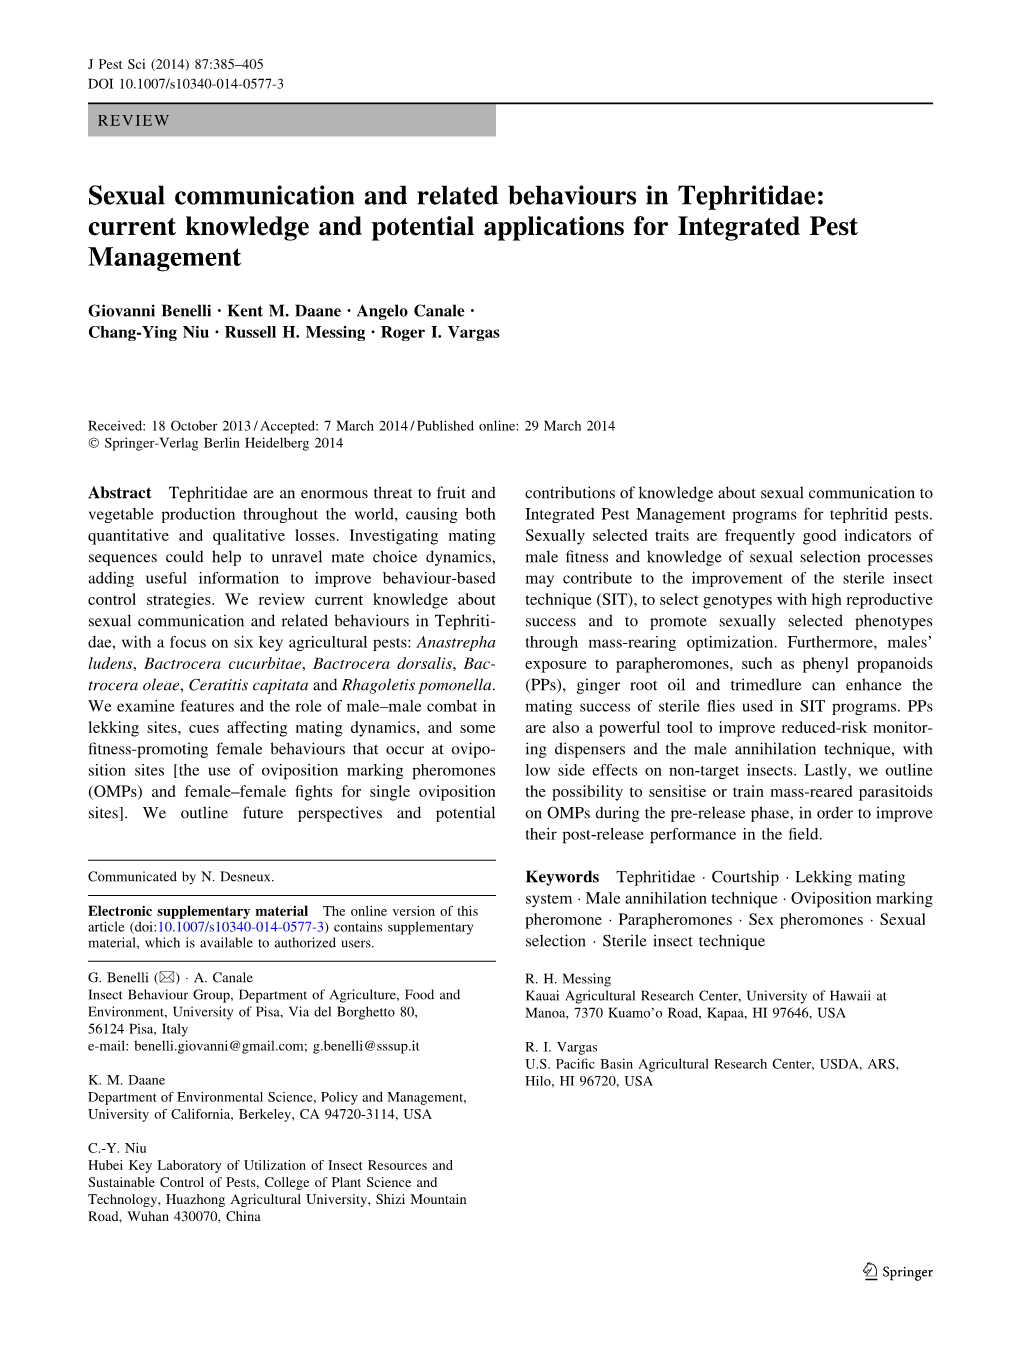 Sexual Communication and Related Behaviours in Tephritidae: Current Knowledge and Potential Applications for Integrated Pest Management